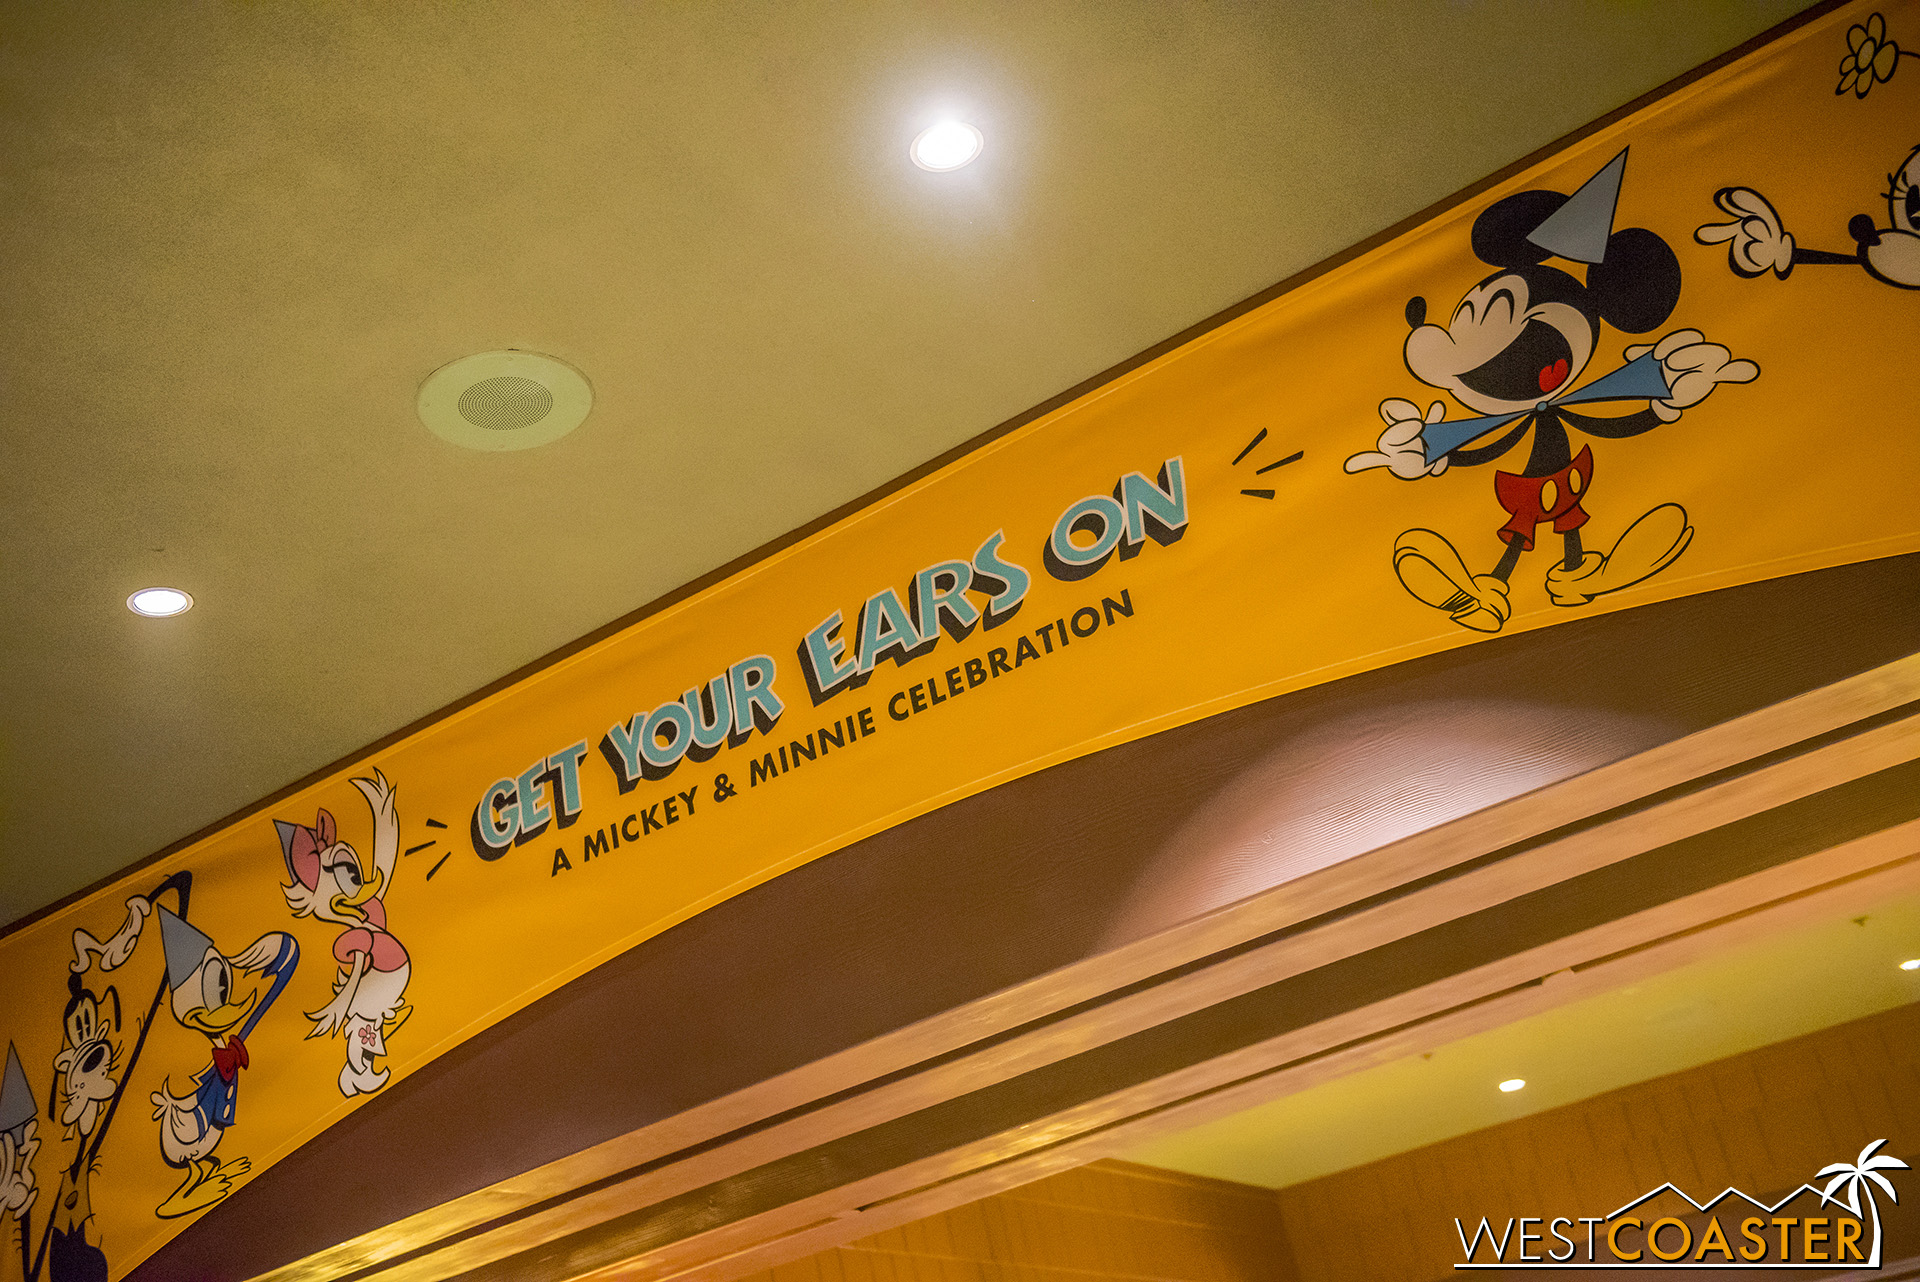  These banners are everywhere throughout the Resort… in Downtown Disney, along the streets, and even in the hotel areas. 